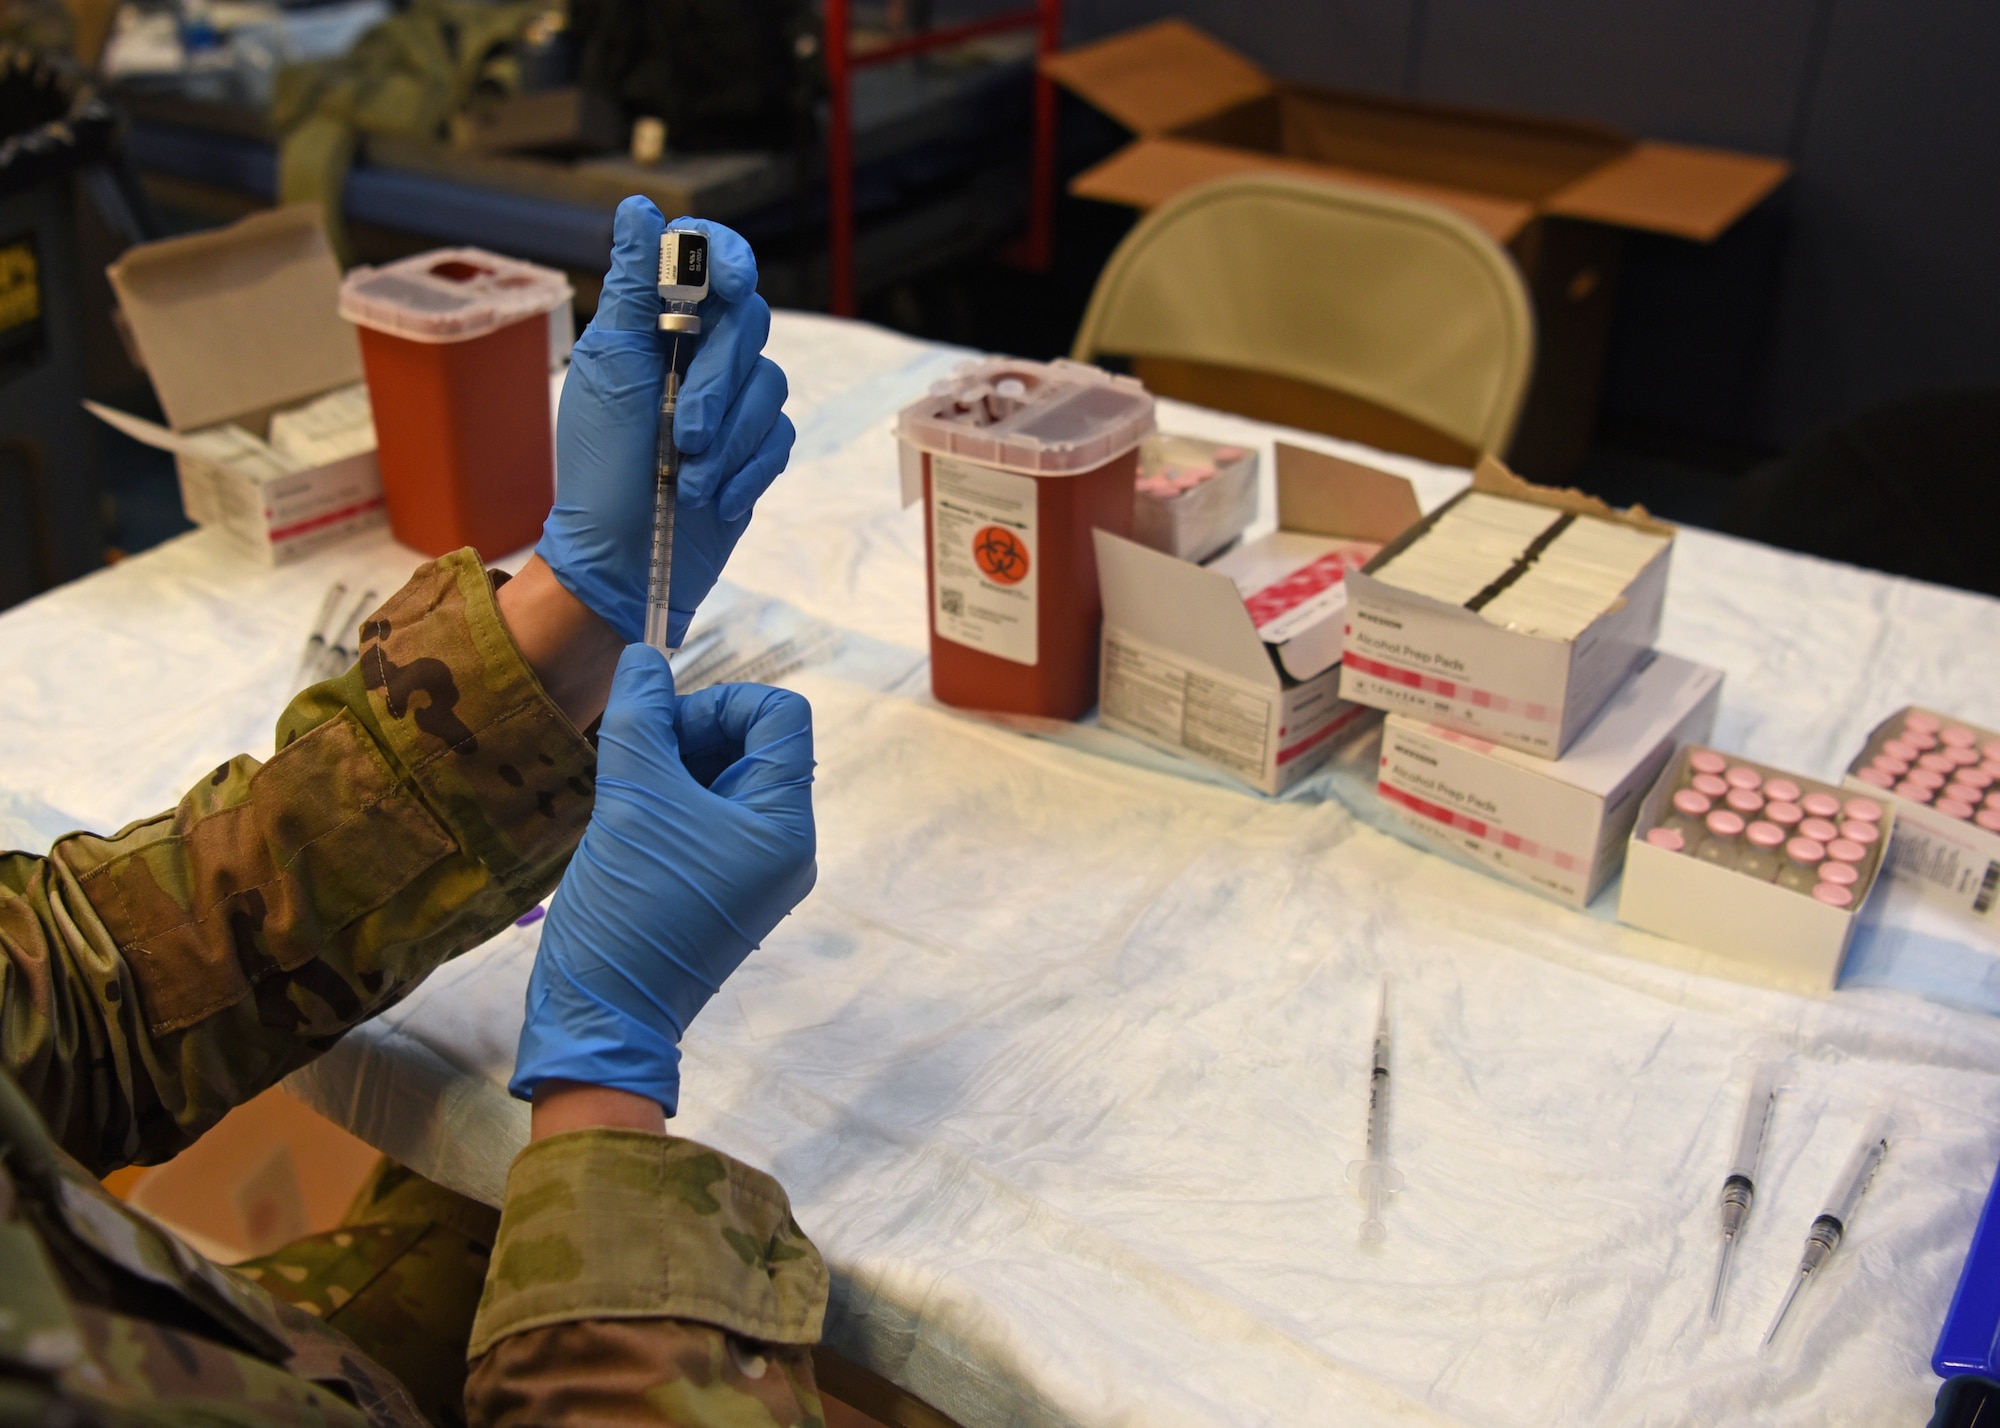 U.S. Air Force Master Sgt. Dianna Karas, 17th Healthcare Operations Squadron family health flight chief, reconstitutes the COVID-19 vaccine in preparation for the immunization clinic hosted at the Mathis Fitness Center on Goodfellow Air Force Base, Texas, Jan. 20, 2021. The vaccine is authorized for emergency use but is voluntary until the Food and Drug Administration fully approves it. (U.S. Air Force photo by Senior Airman Abbey Rieves)